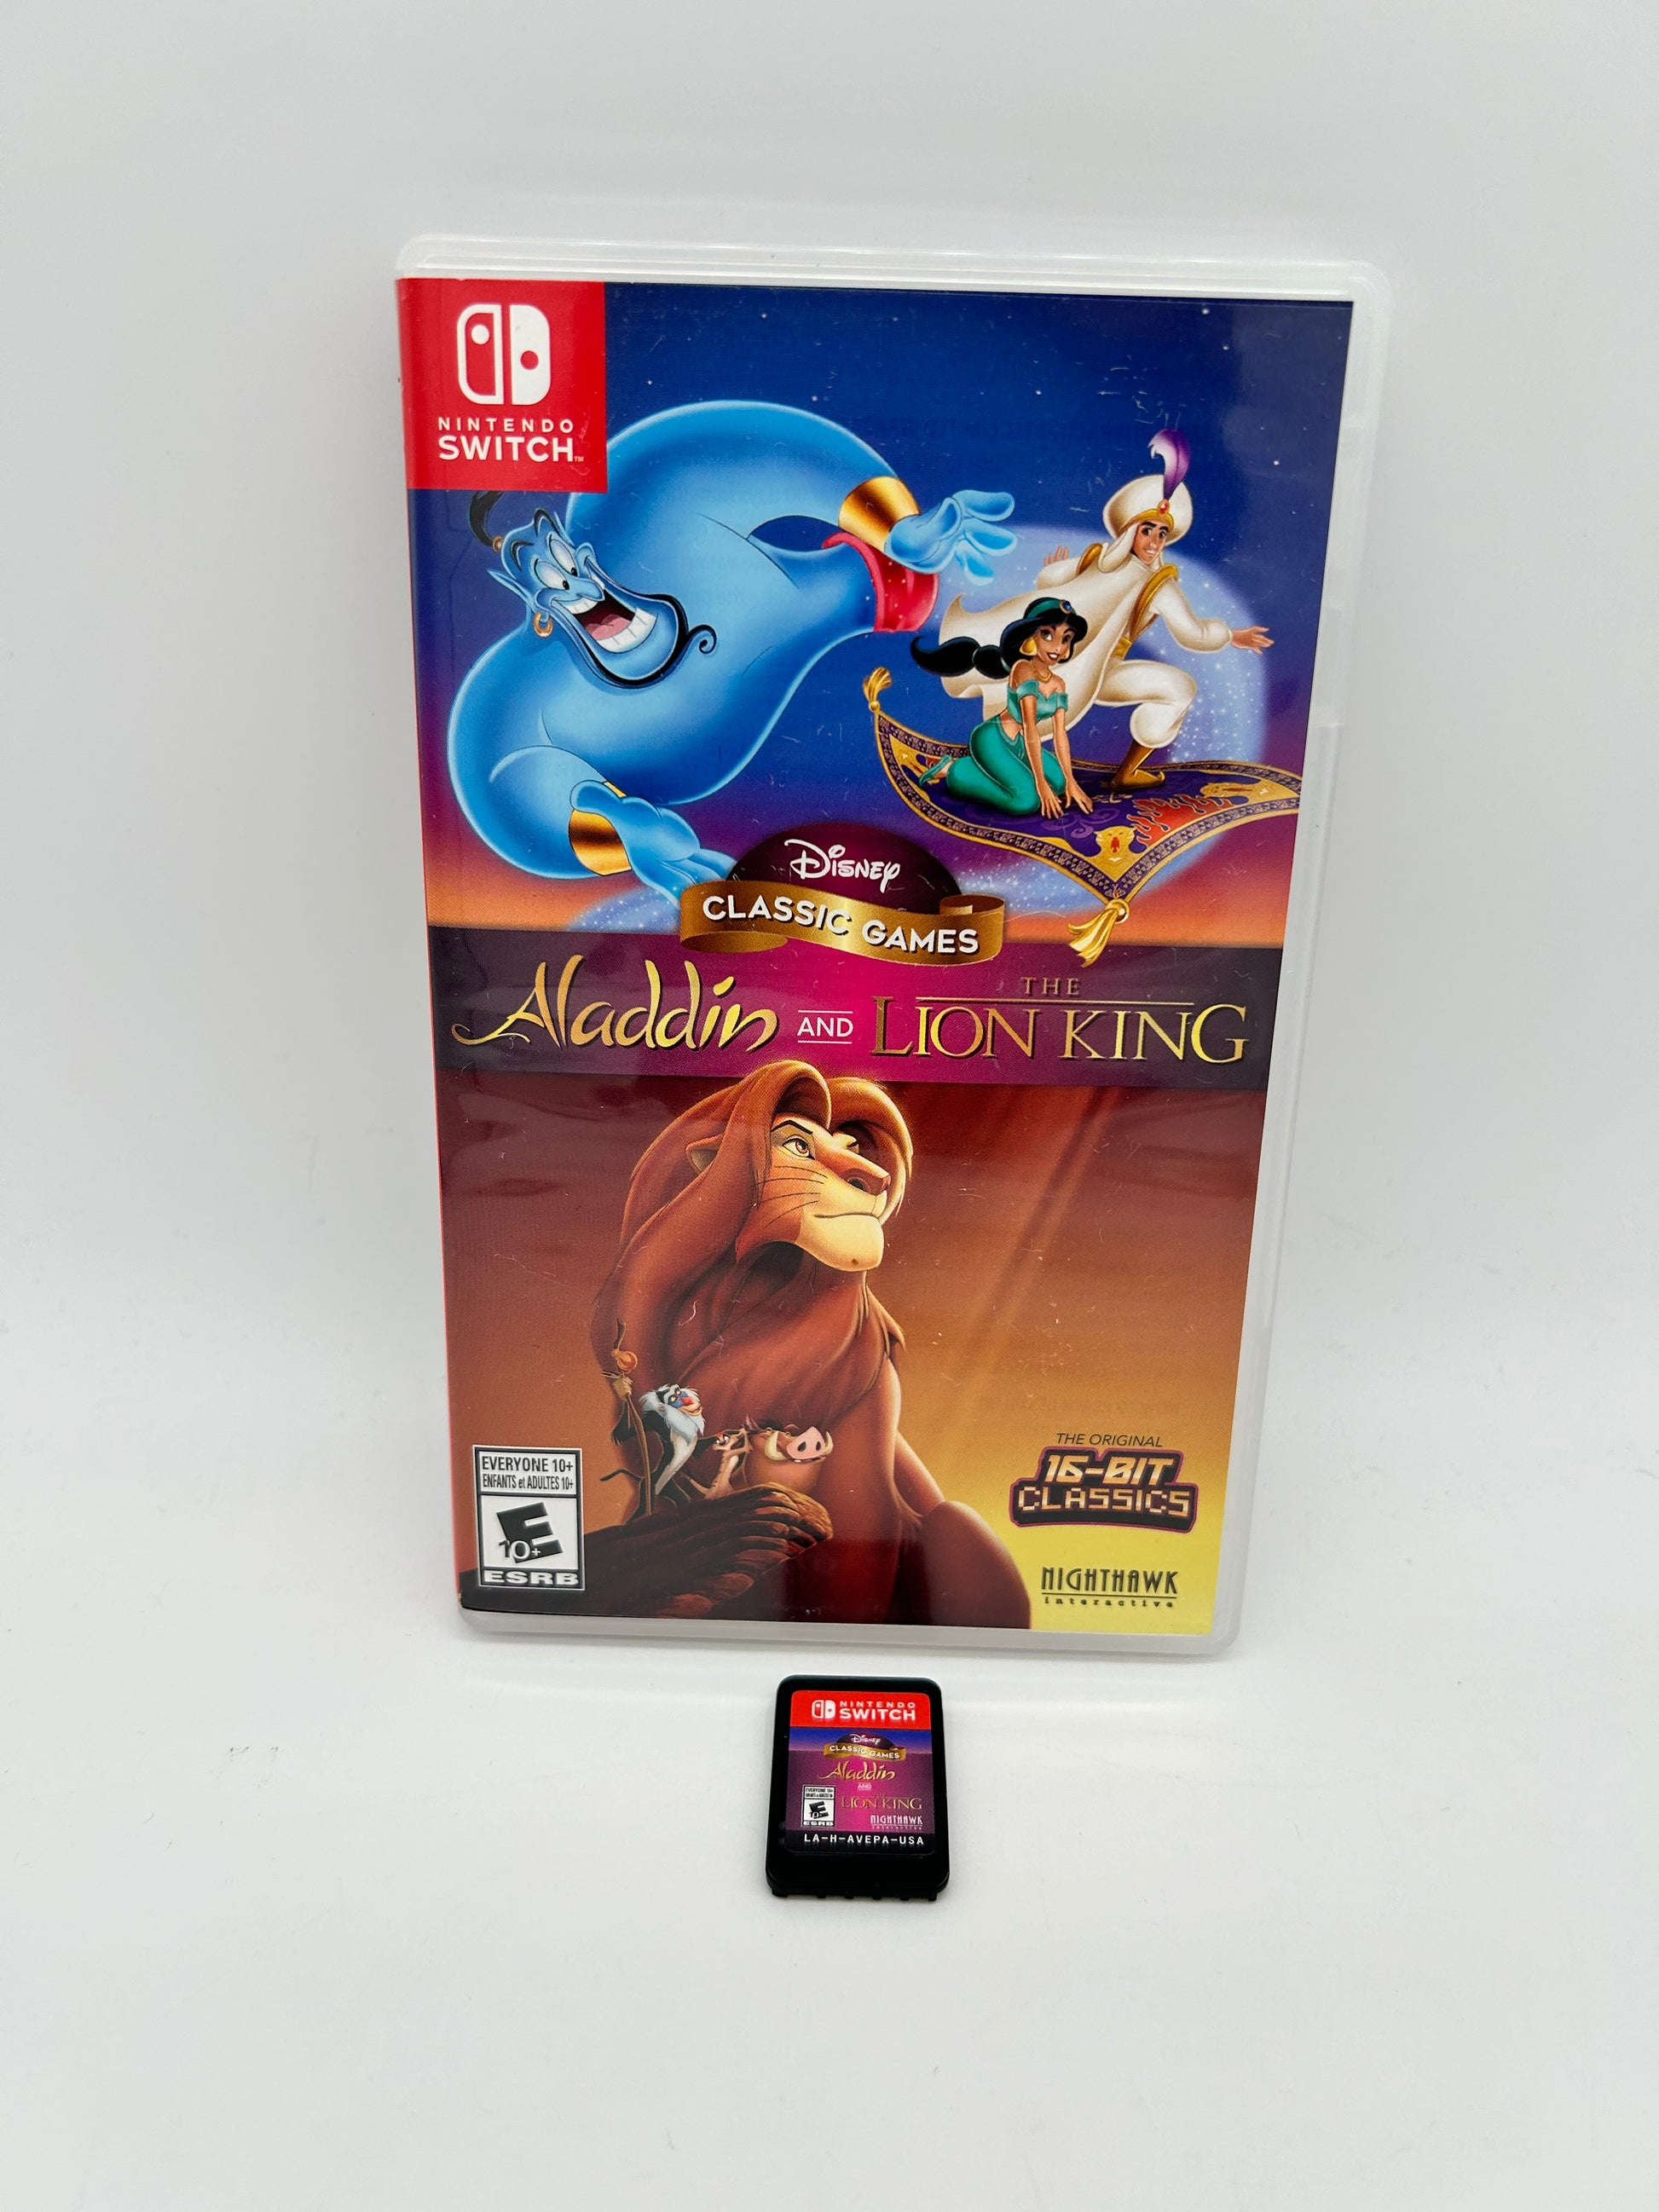 PiXEL-RETRO.COM : NINTENDO SWITCH COMPLETE IN BOX COMPLETE MANUAL GAME NTSC ALADDIN AND THE LION KING DISNEY CLASSIC GAMES